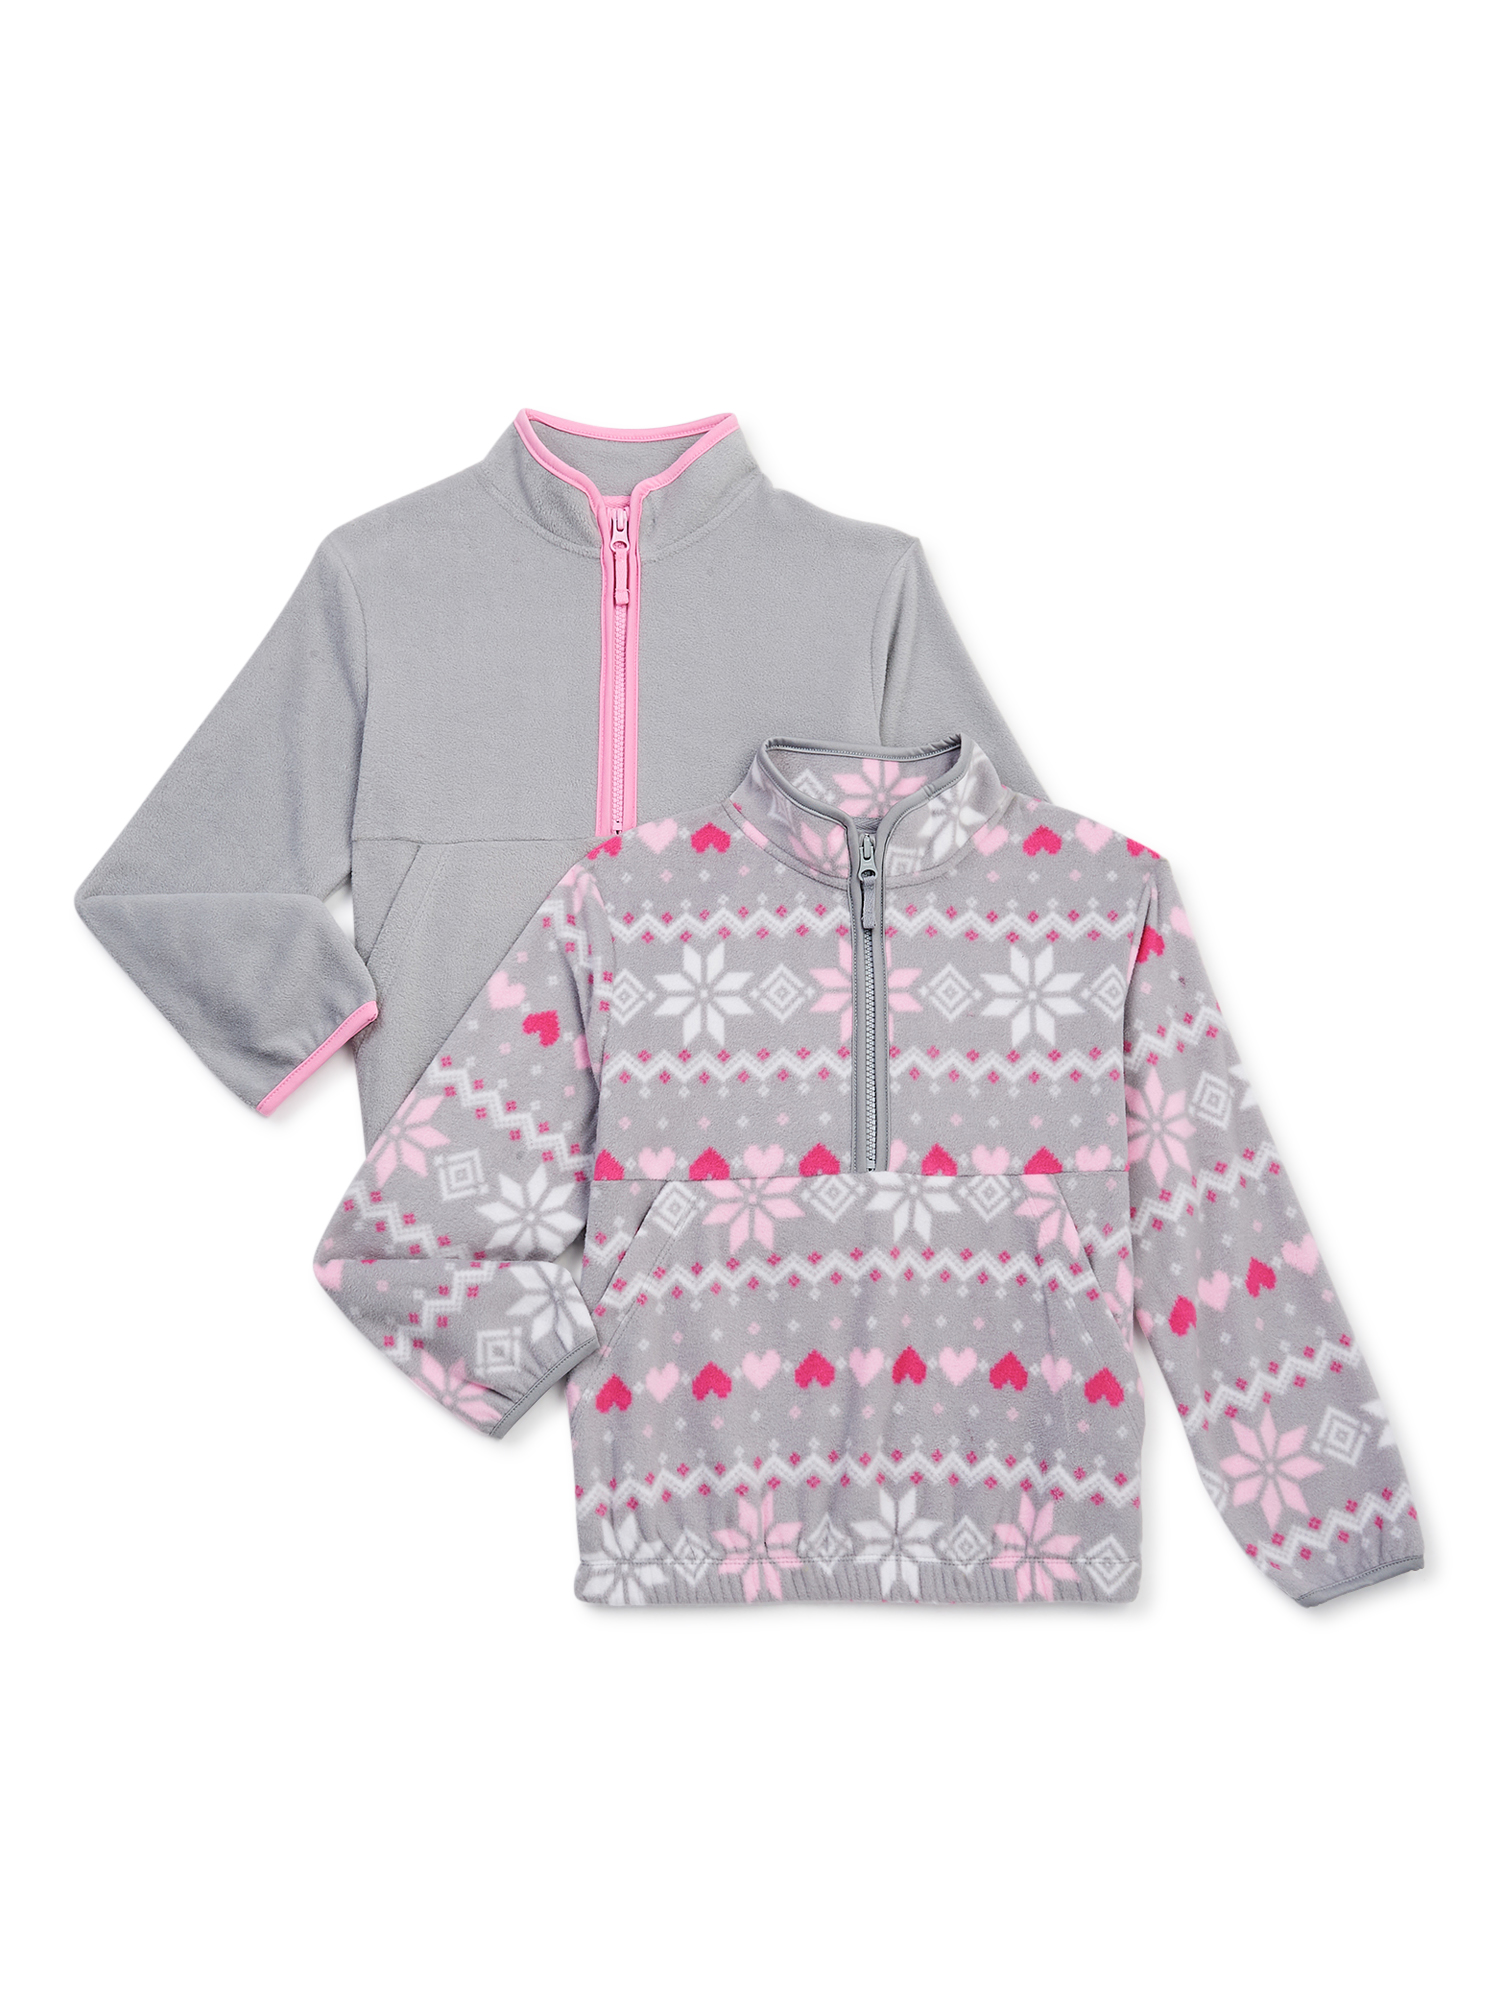 Athletic Works Girls Microfleece Half-Zip Pullover, 2-Pack, Sizes 4-18 & Plus - image 1 of 3